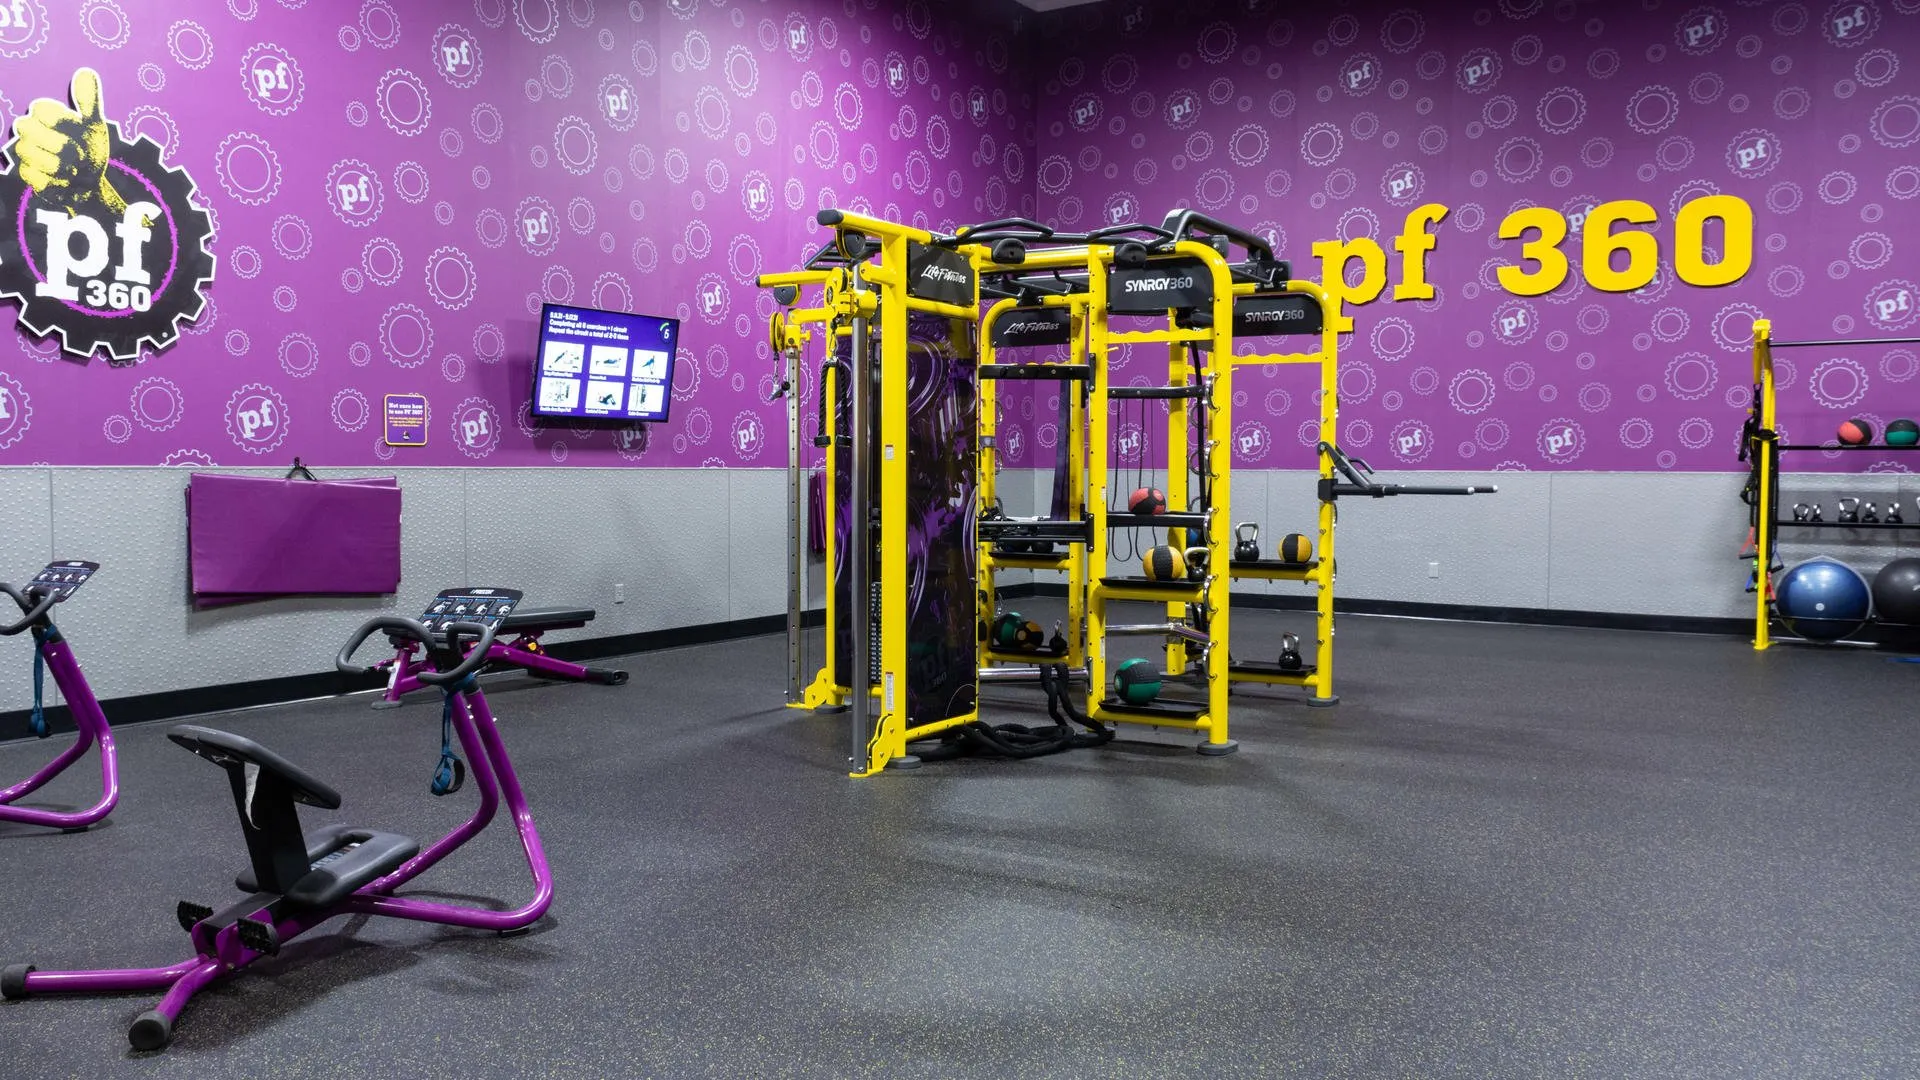 Planet Fitness Hours